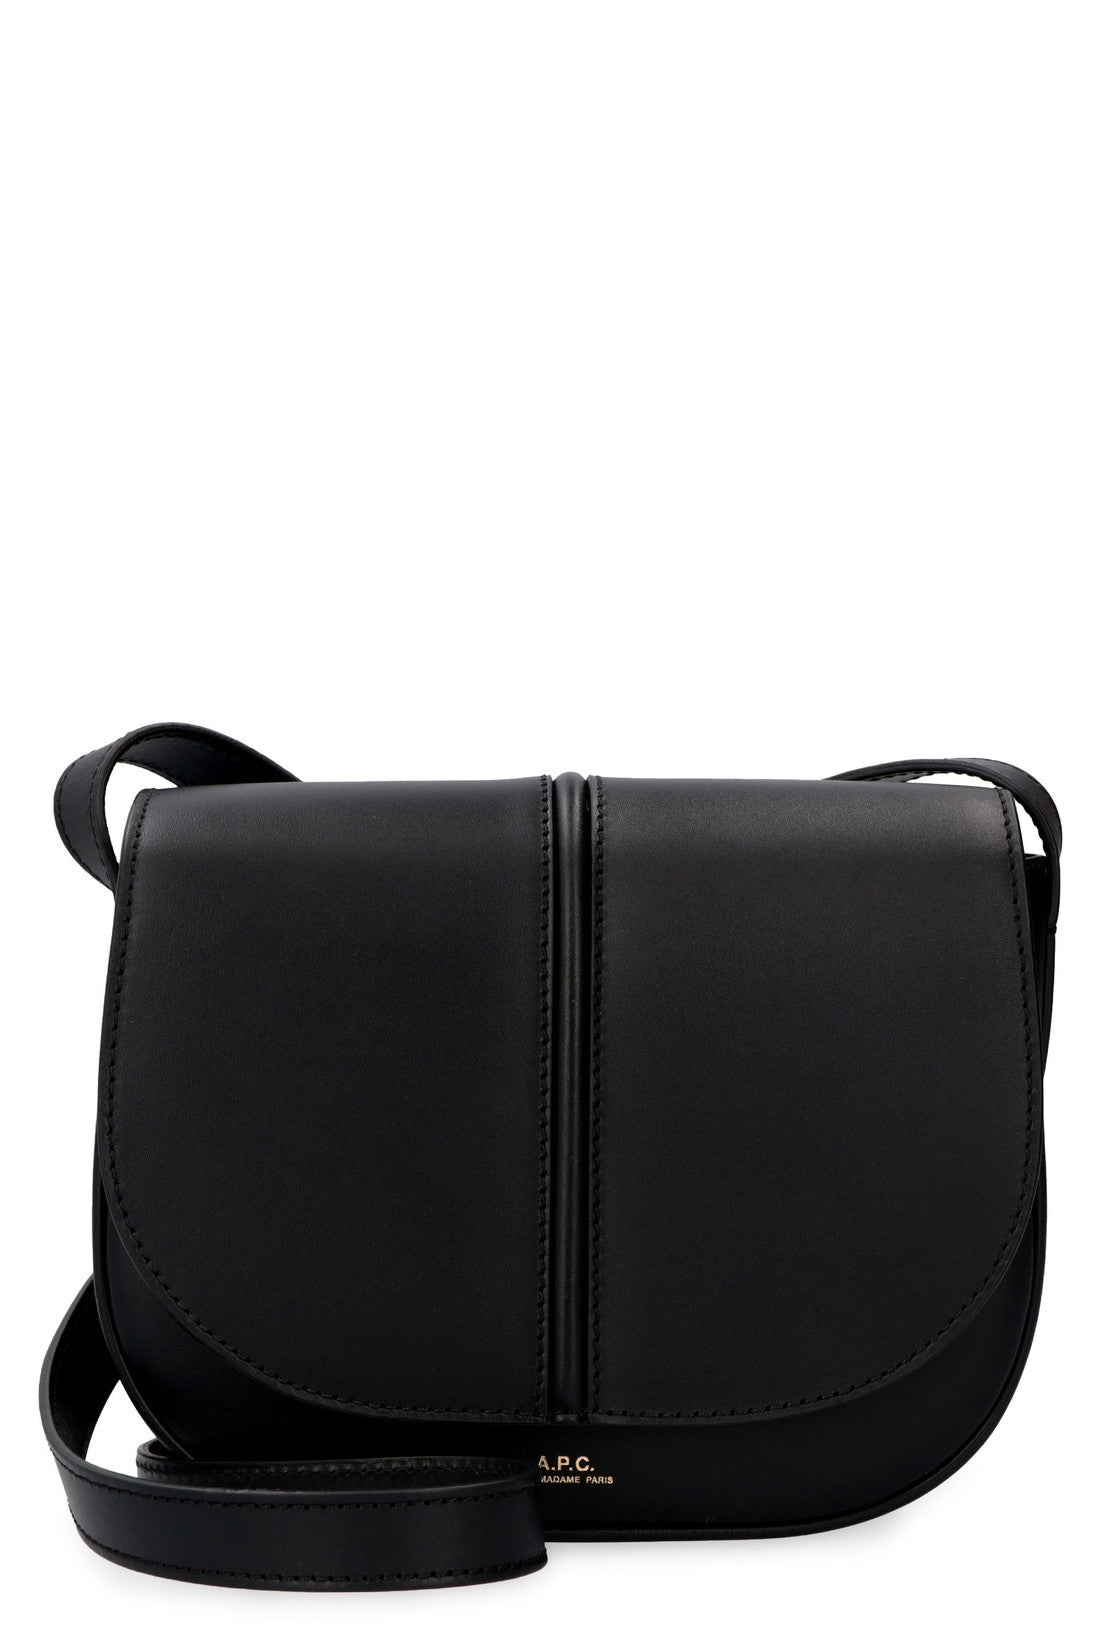 A.P.C.-OUTLET-SALE-Betty leather crossbody bag-ARCHIVIST